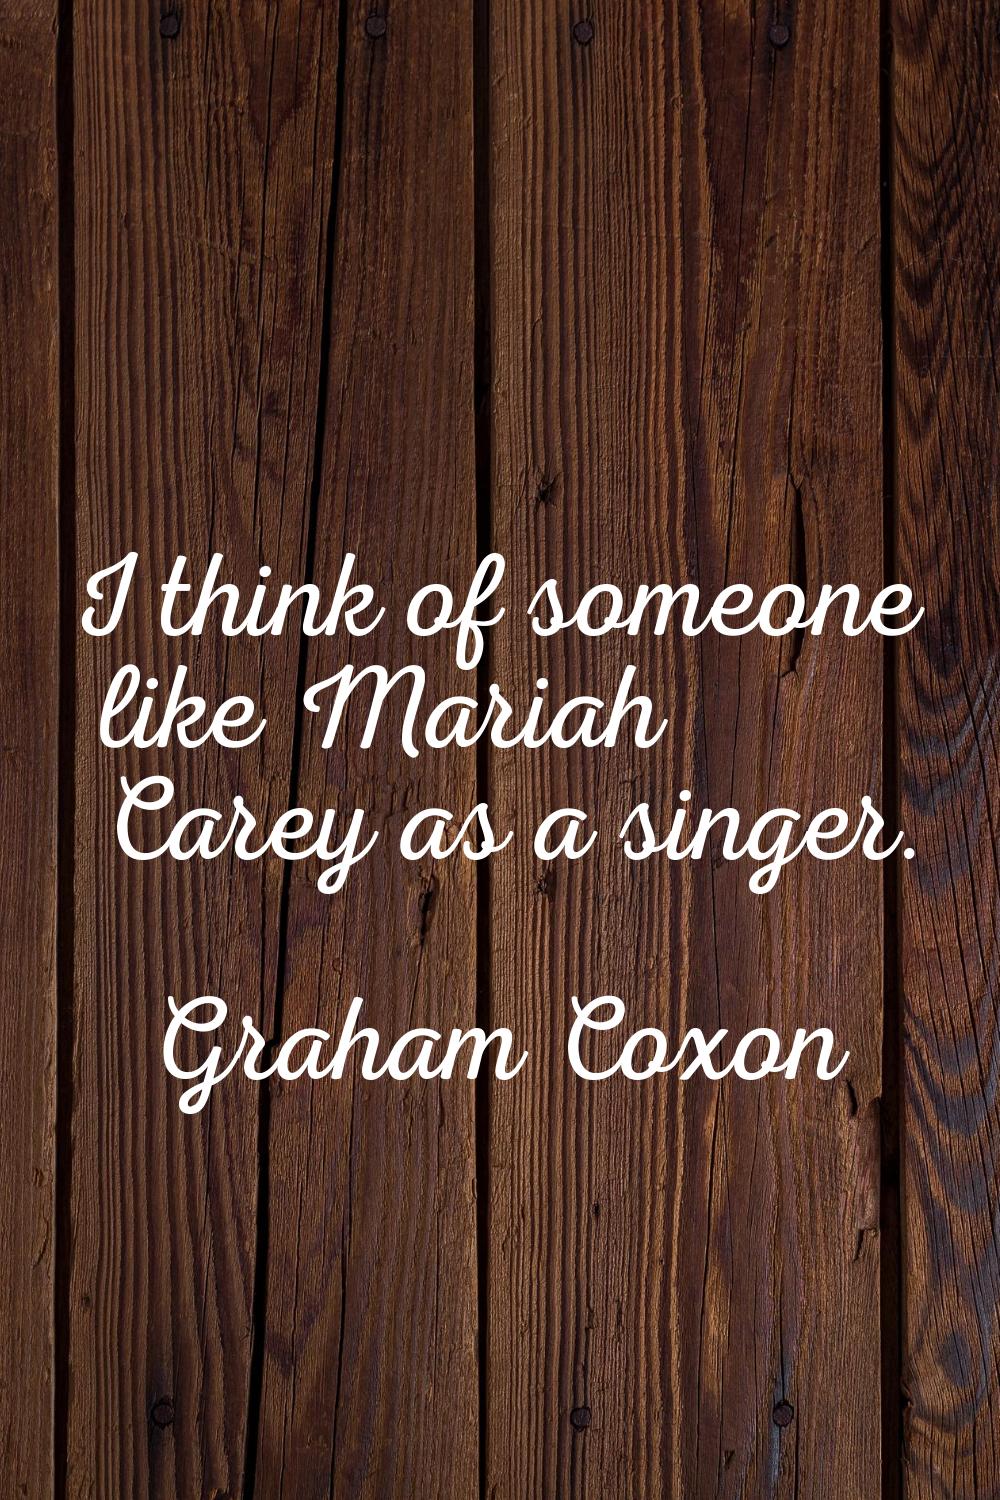 I think of someone like Mariah Carey as a singer.